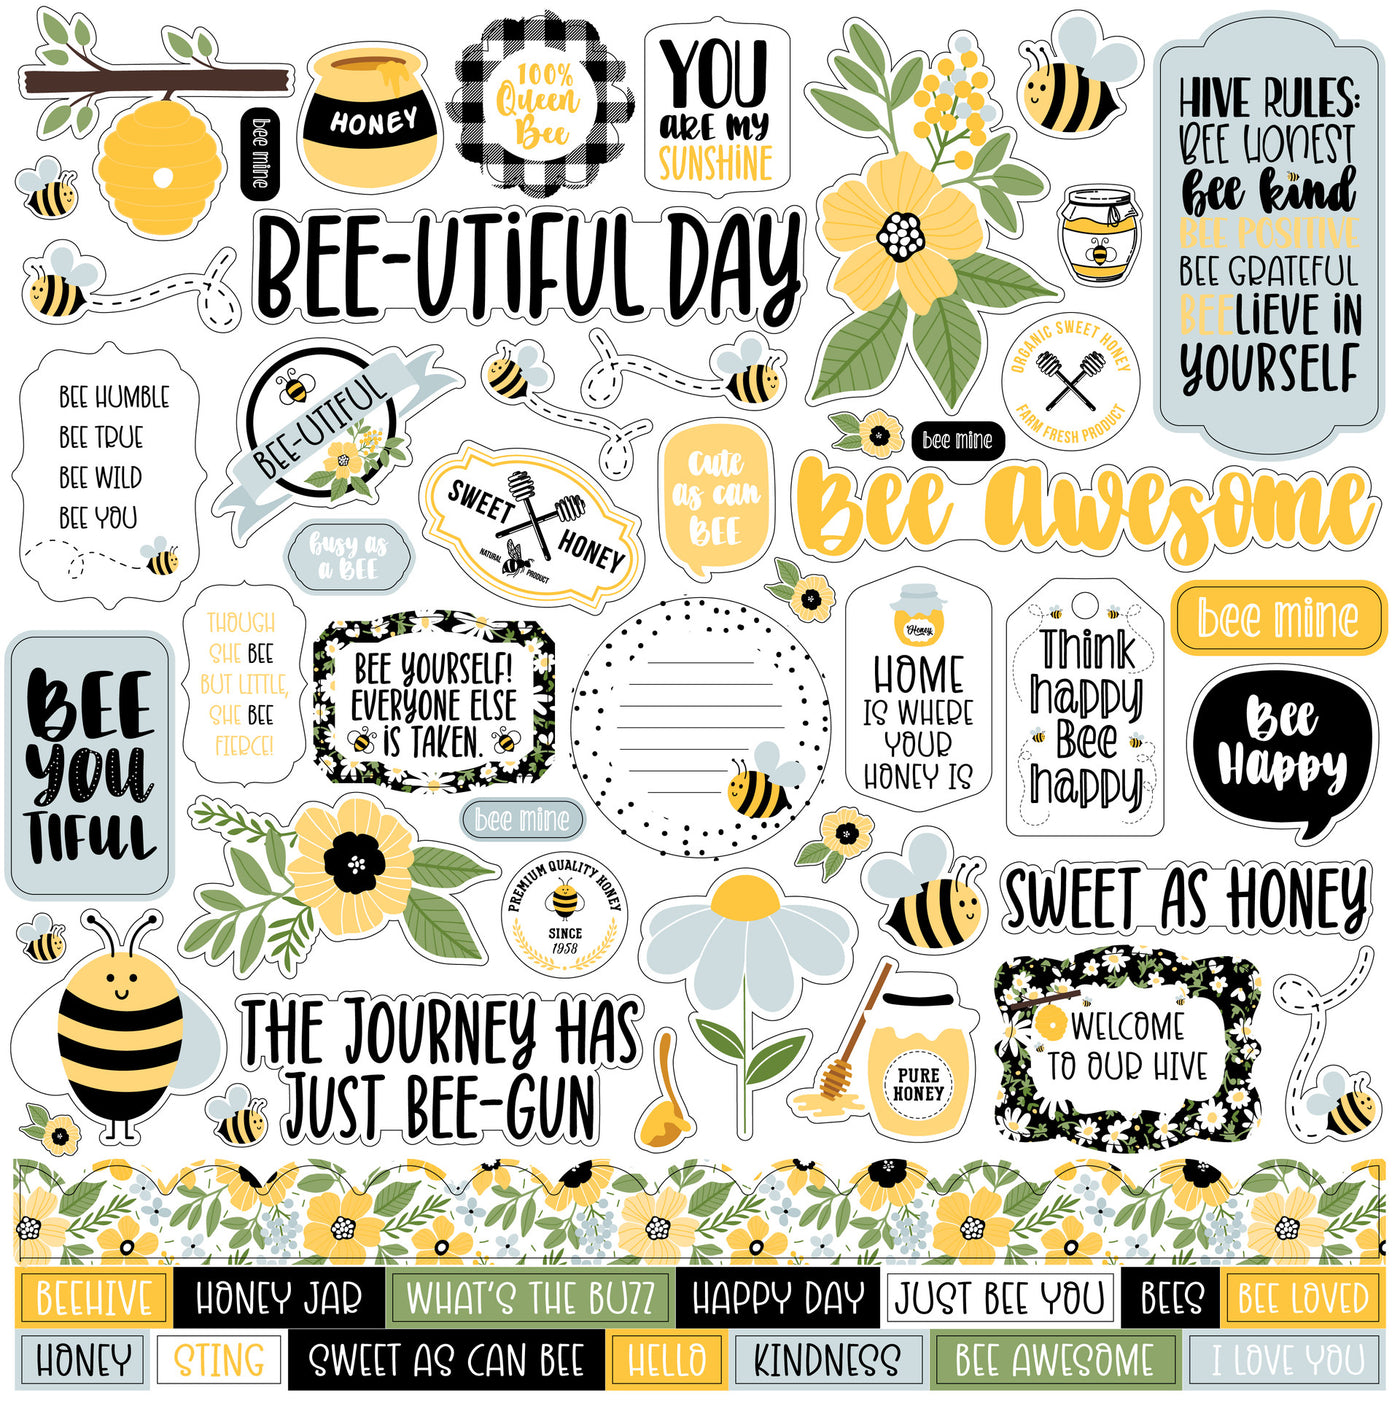 Bee Happy Elements 12" x 12" Cardstock Stickers from the Bee Happy Collection by Echo Park. These stickers include bees, flowers, a honey pot, phrases, borders, and more!  